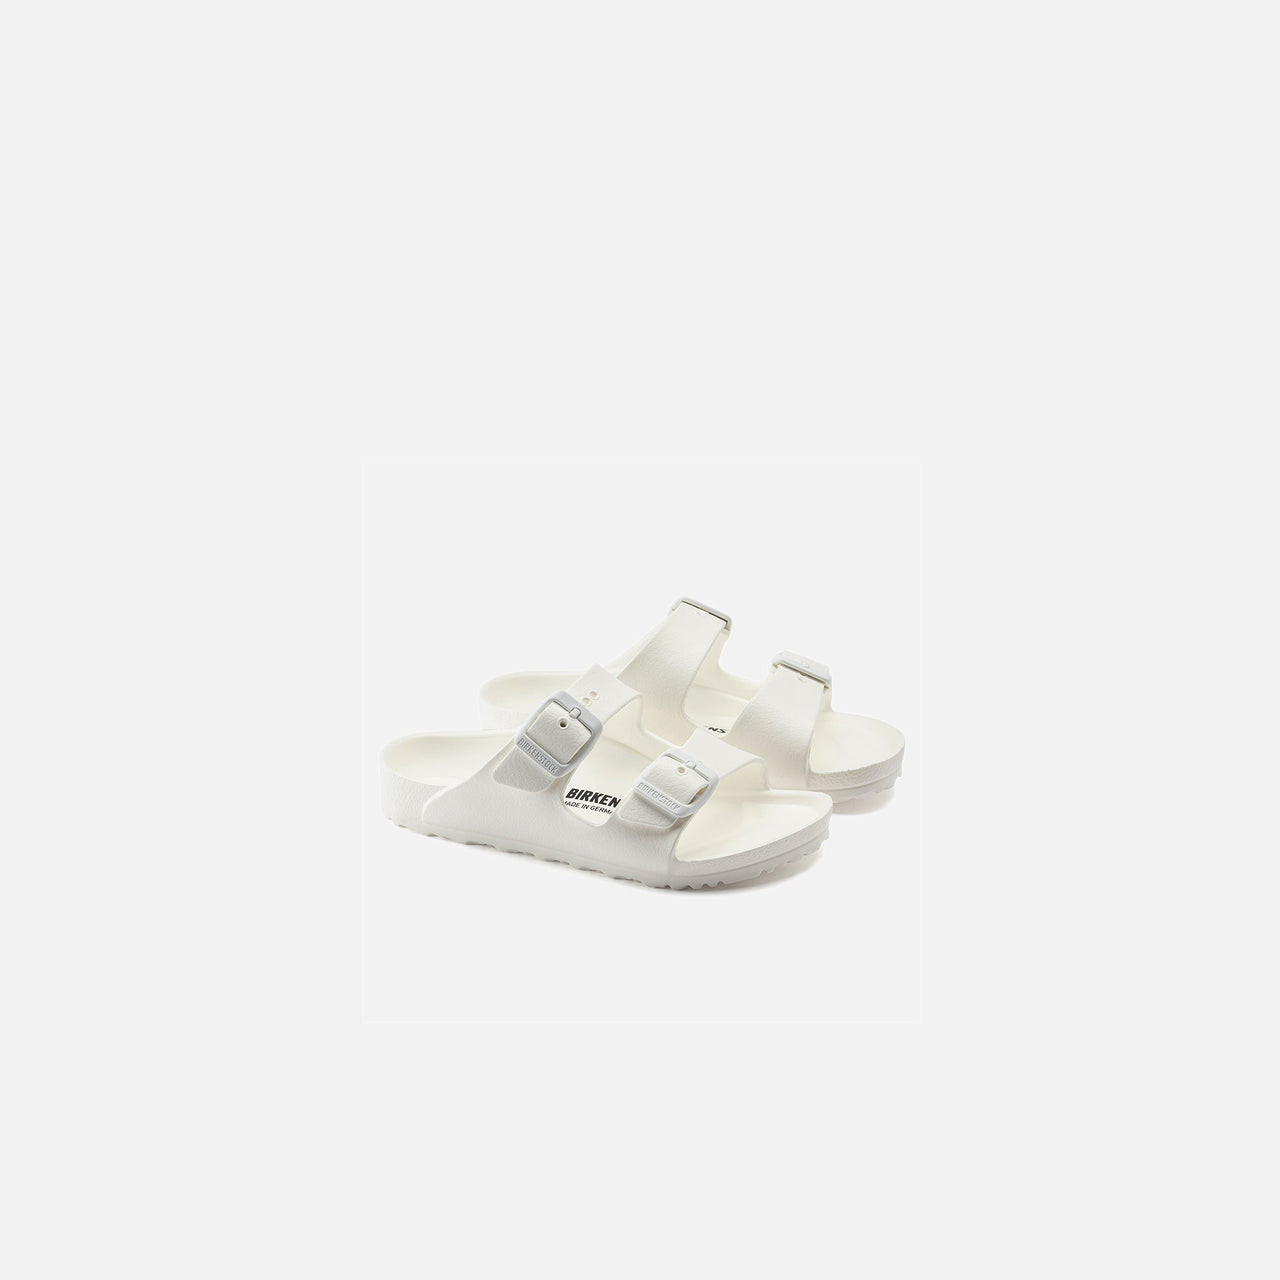 Birkenstock Kids Arizona Eva White Sandals with Durable and Flexible Construction for Active Kids